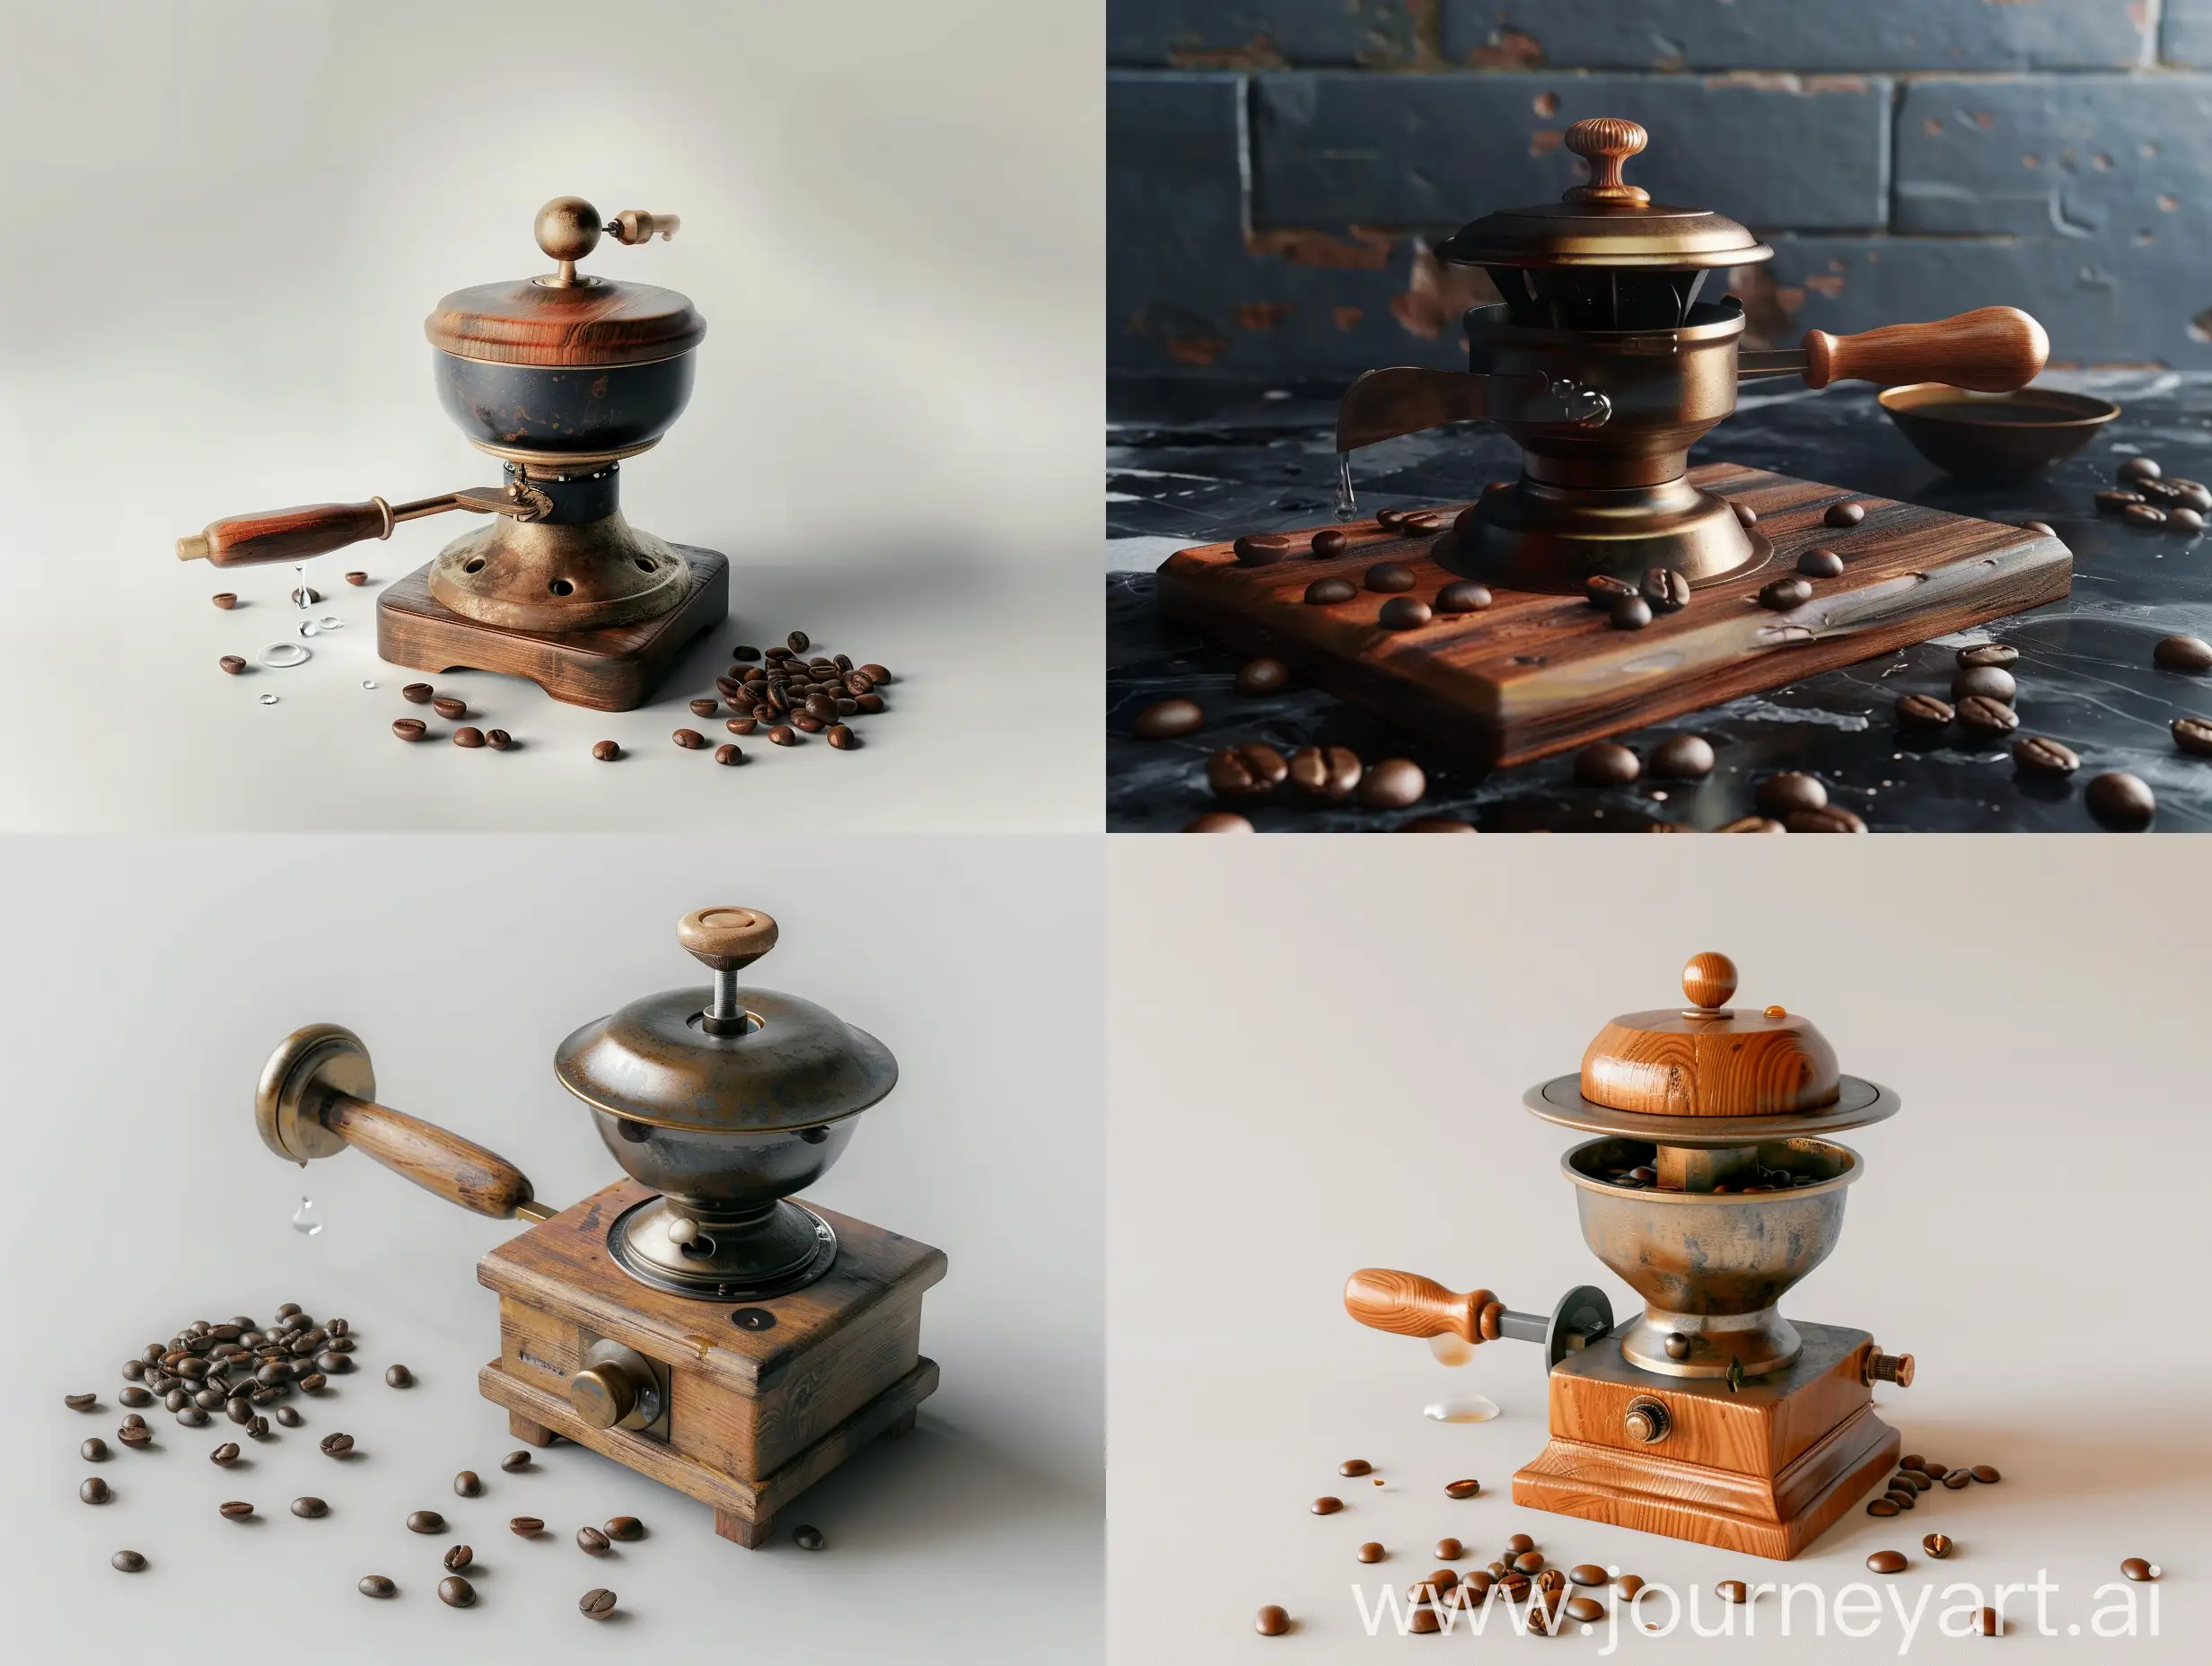 Vintage-Wooden-Manual-Coffee-Grinder-with-Bronze-Handle-and-Coffee-Beans